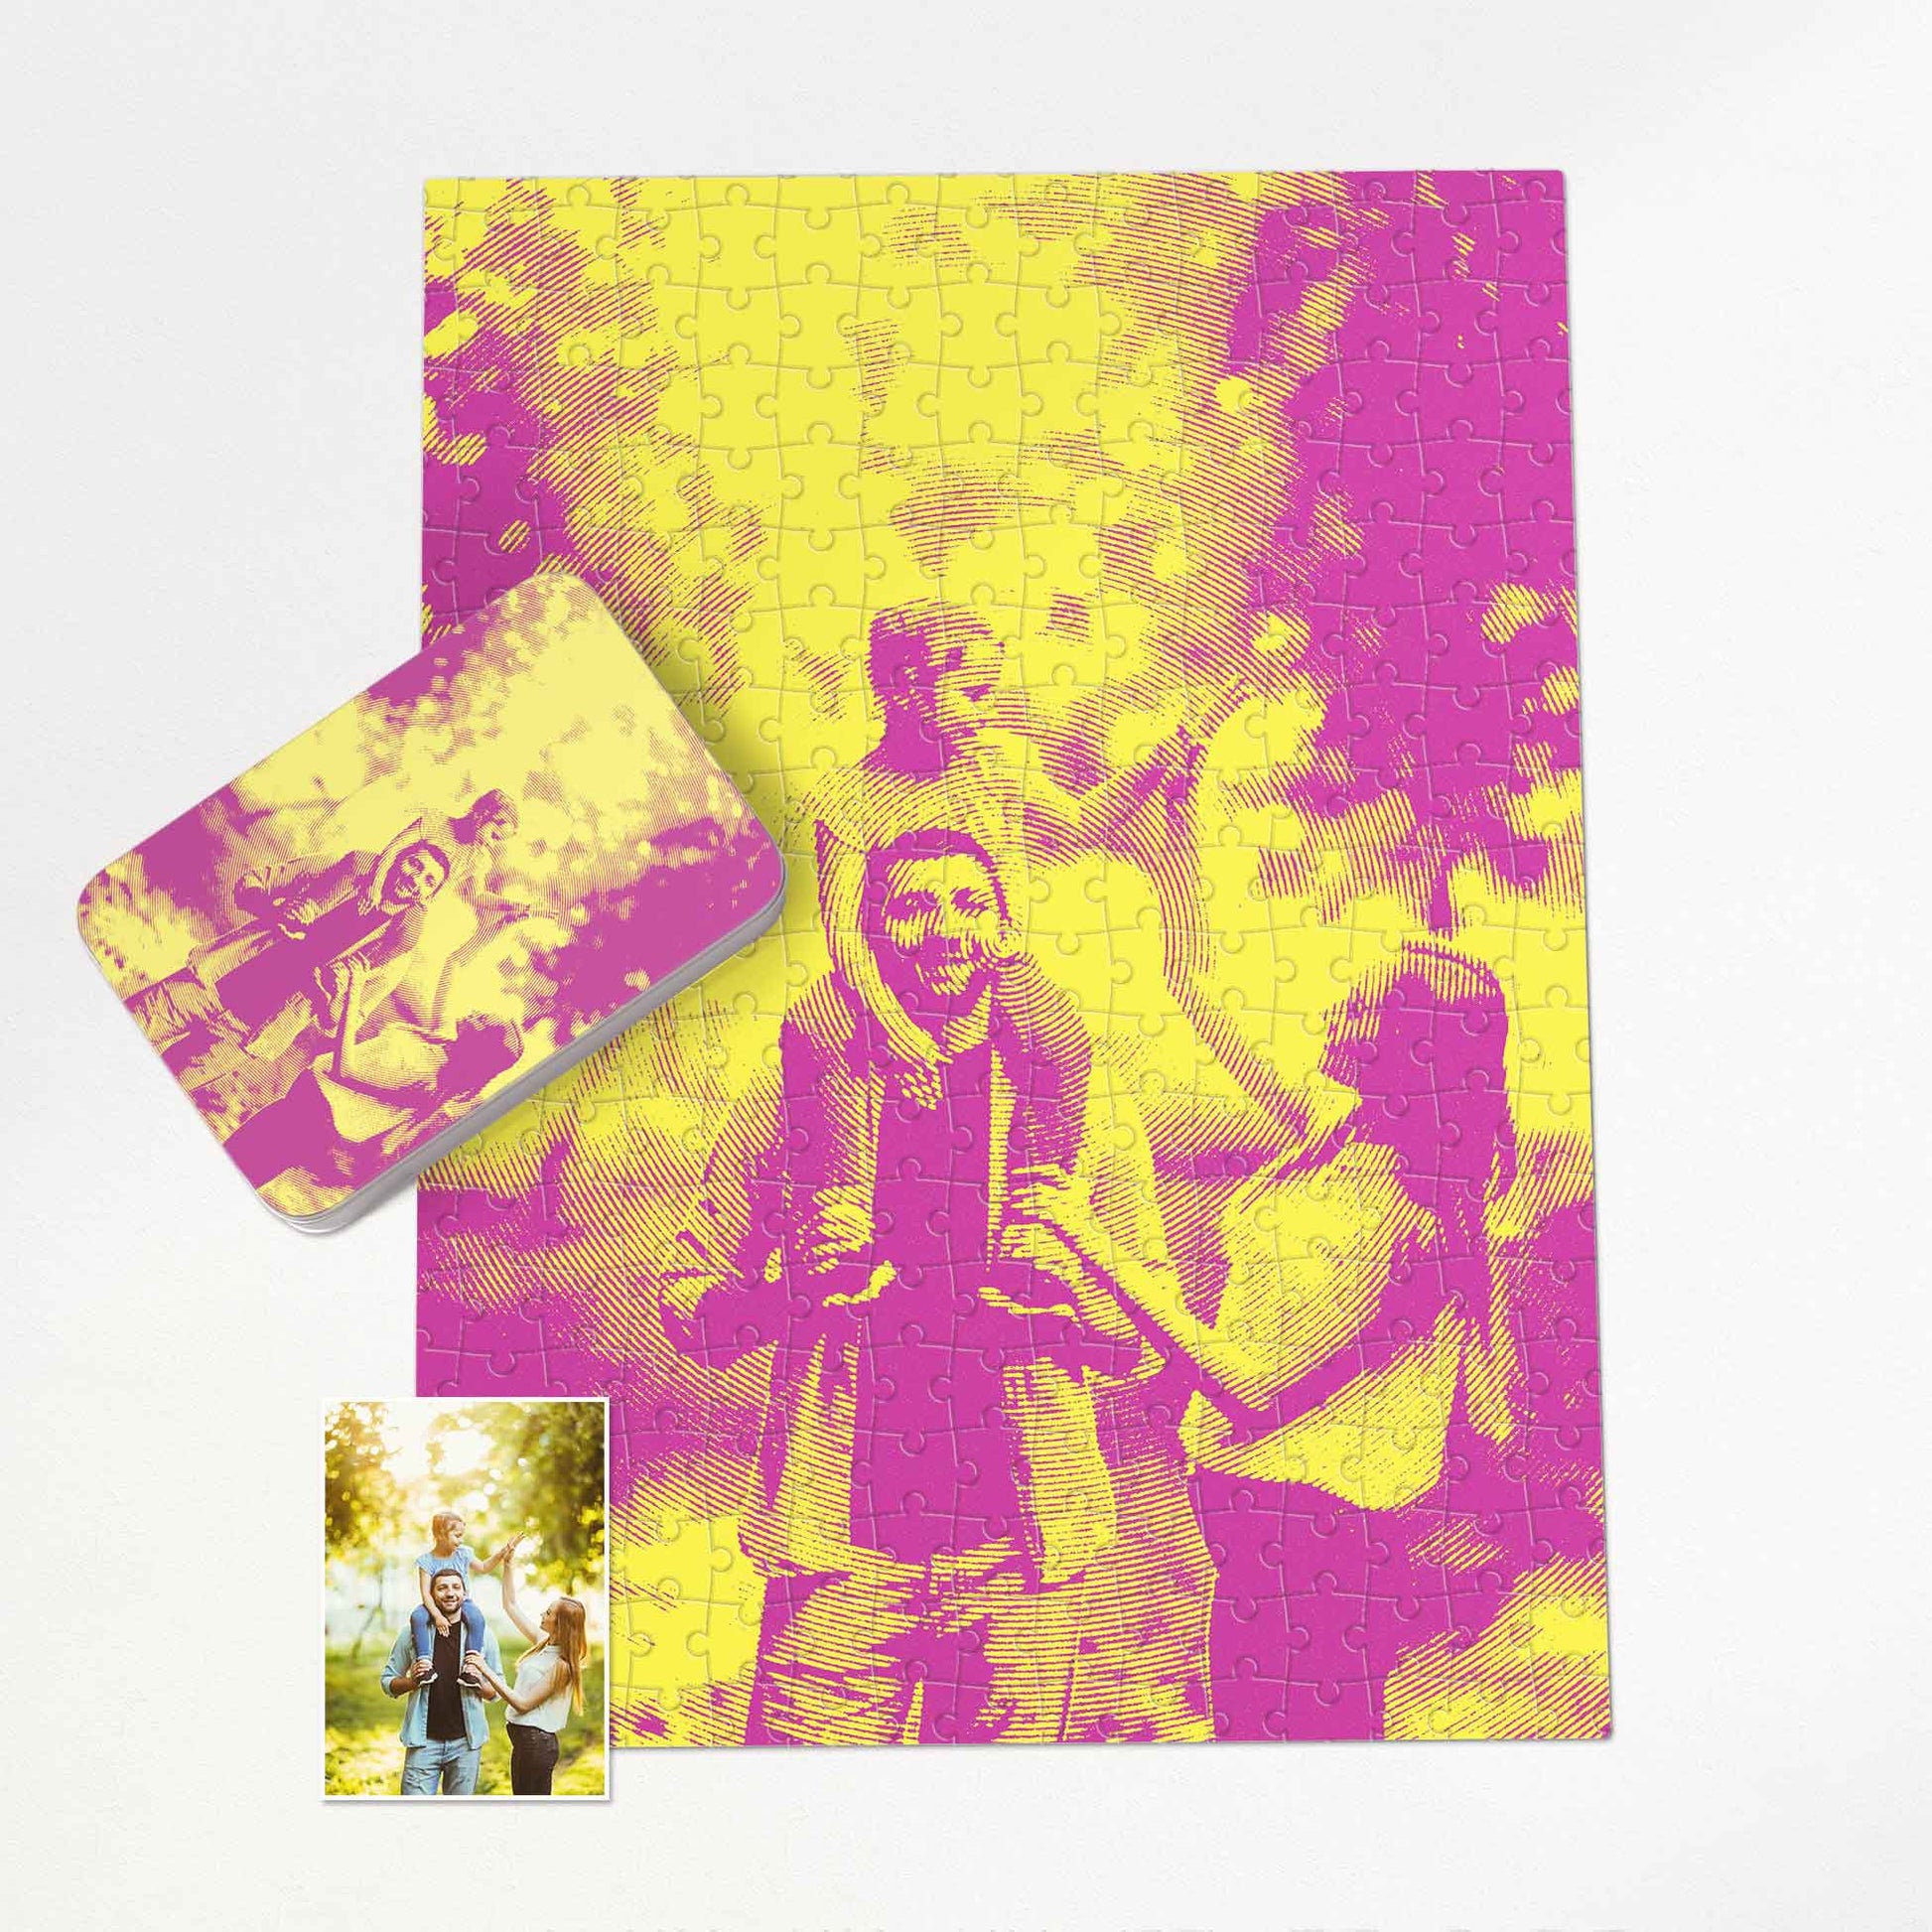 Unleash creativity with a Personalised Yellow & Pink Texture Jigsaw Puzzle. Print from photo in abstract style with cool yellow and pink hues. Handmade with passion, it's a joyful and unique gift for family and friends